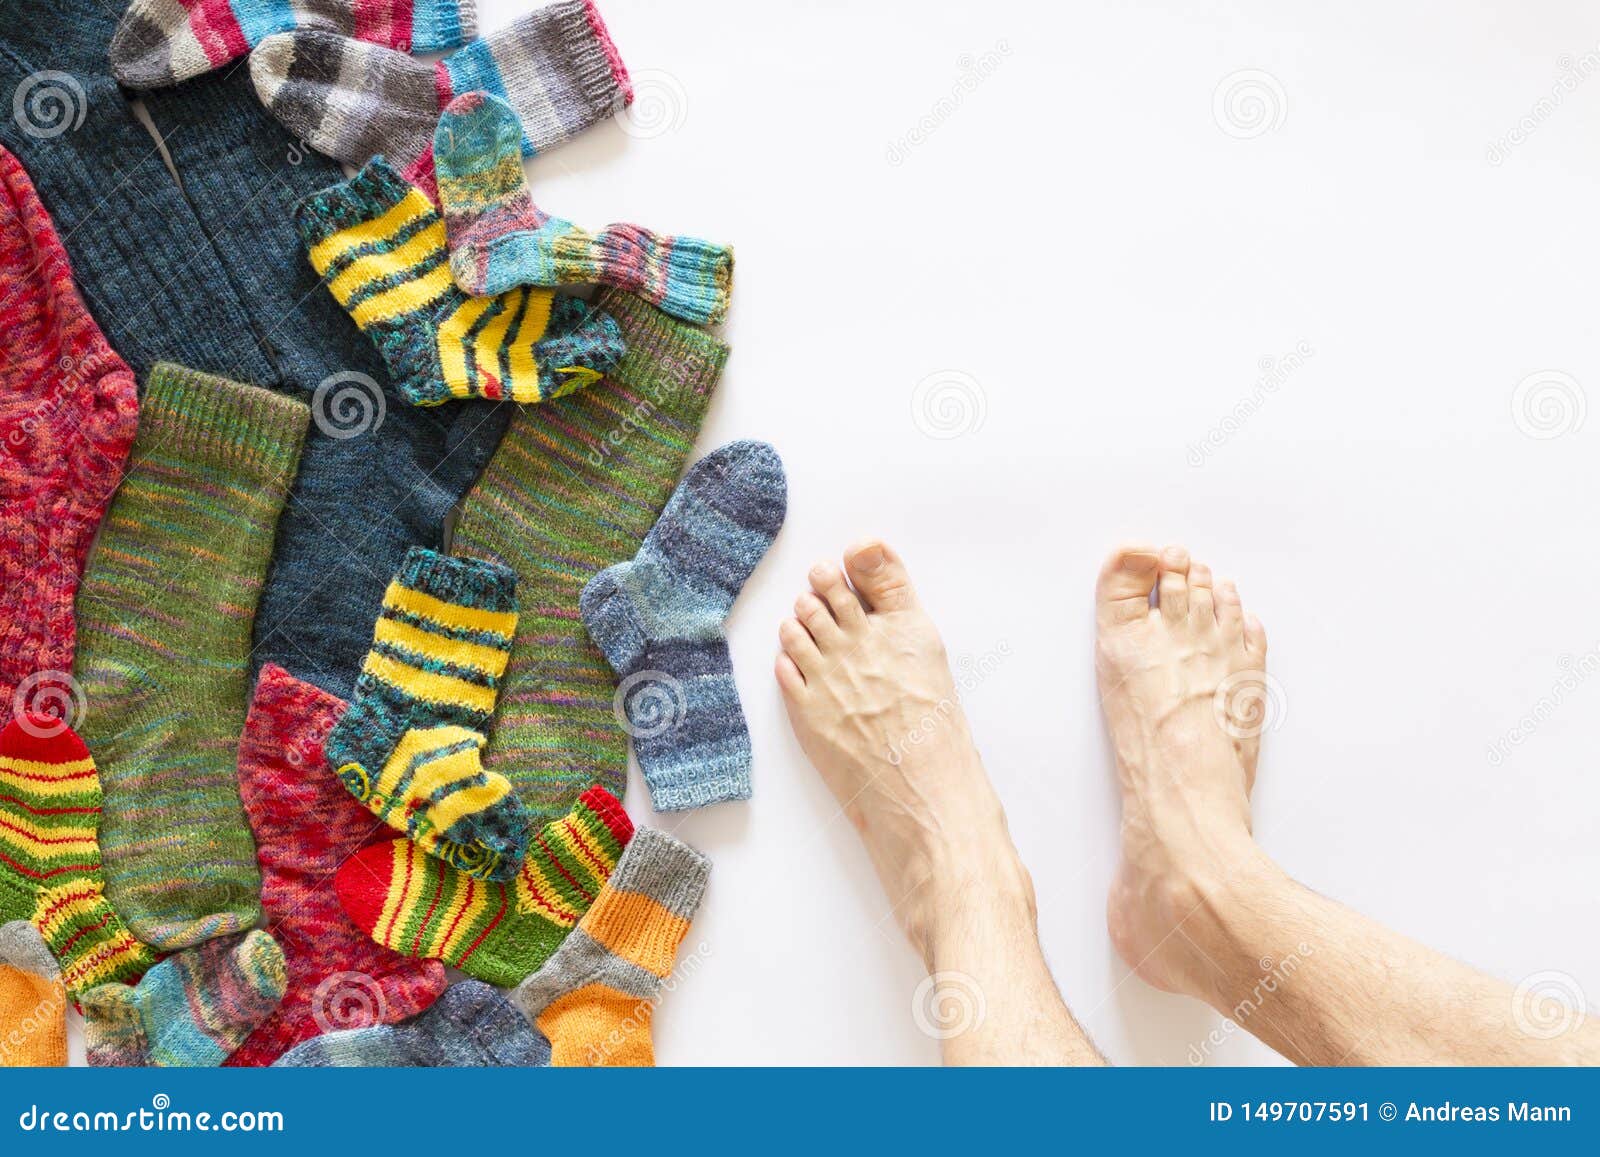 Colorful Woolen Socks And A Pair Of Legs On White Background Stock